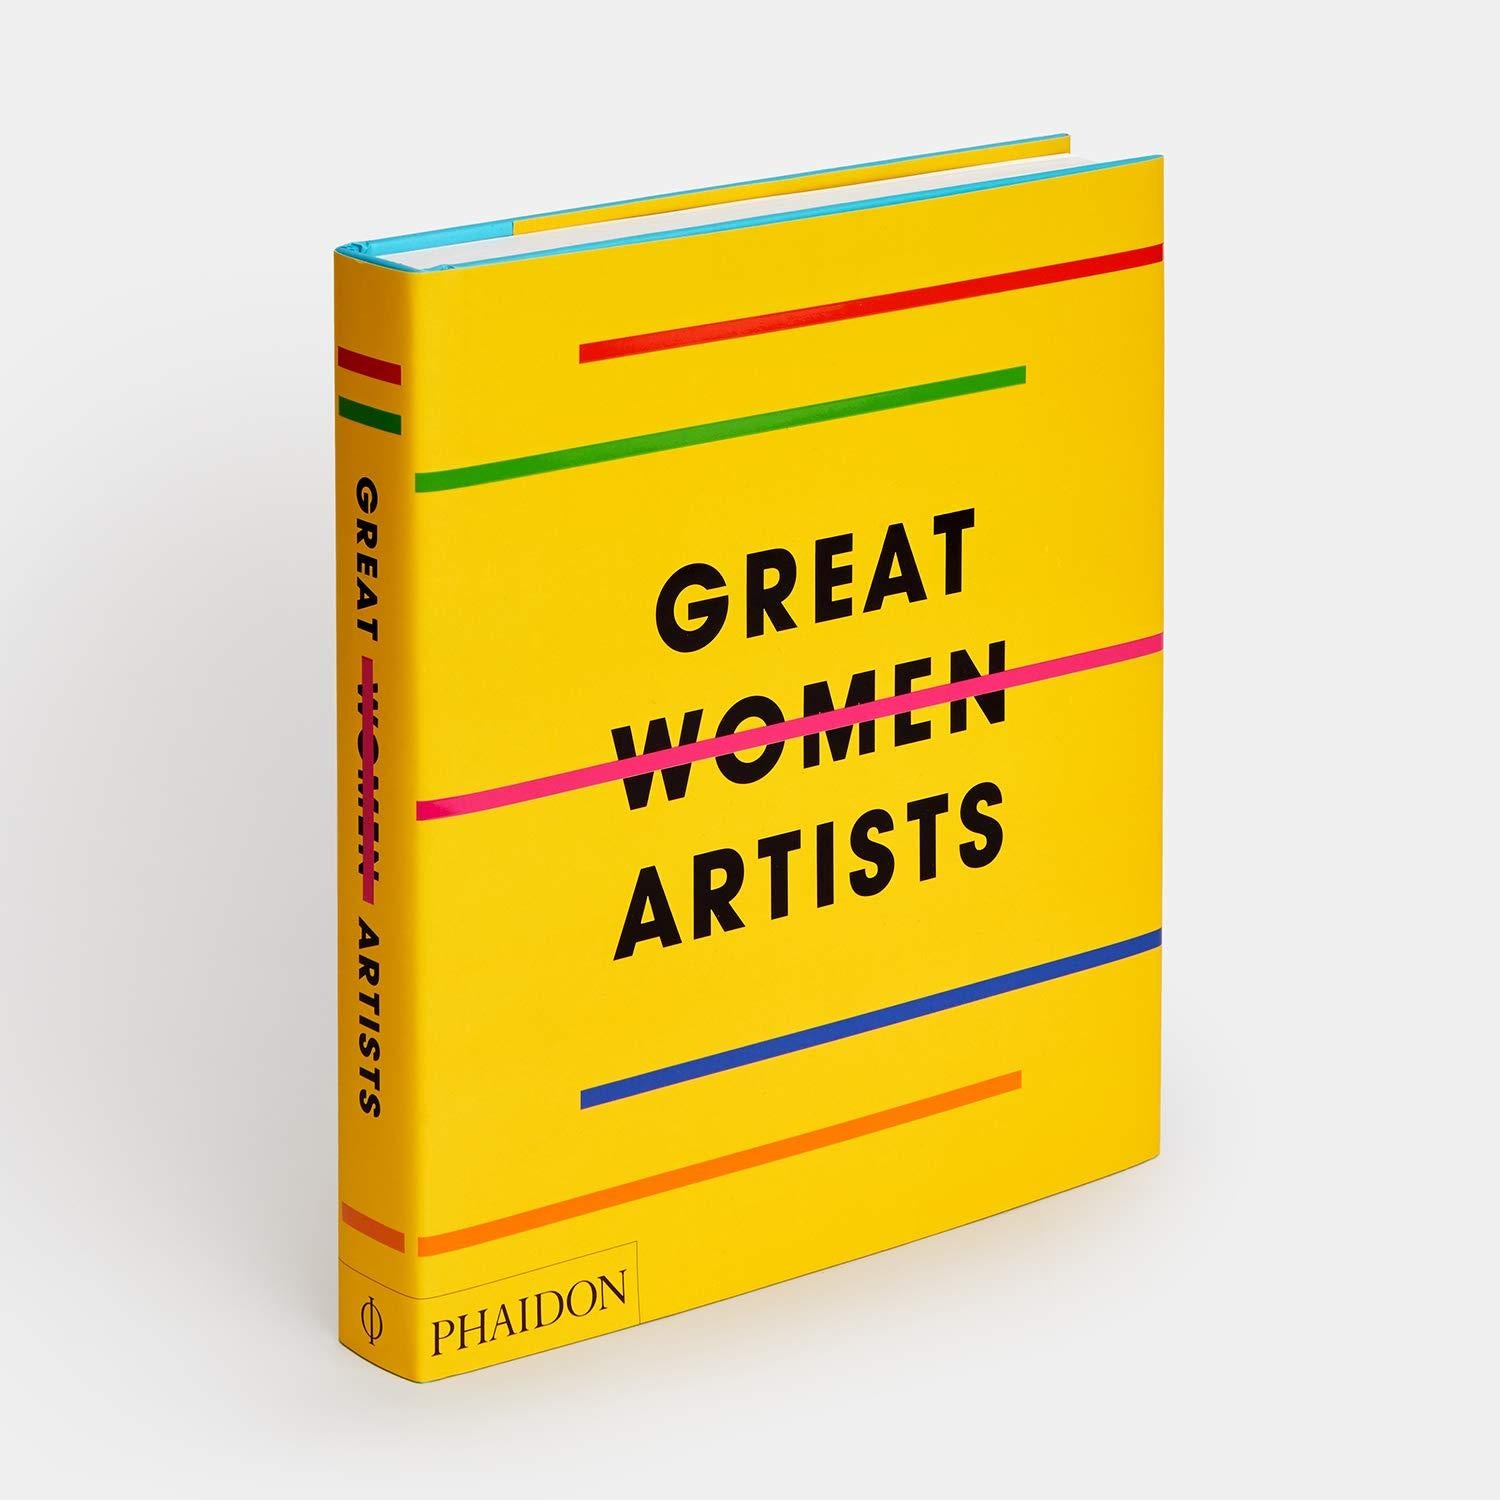 Great Women Artists: Phaidon Editors
In stock in Los Angeles

Five centuries of fascinating female creativity presented in more than 400 compelling artworks and one comprehensive volume

The most extensive fully illustrated book of women